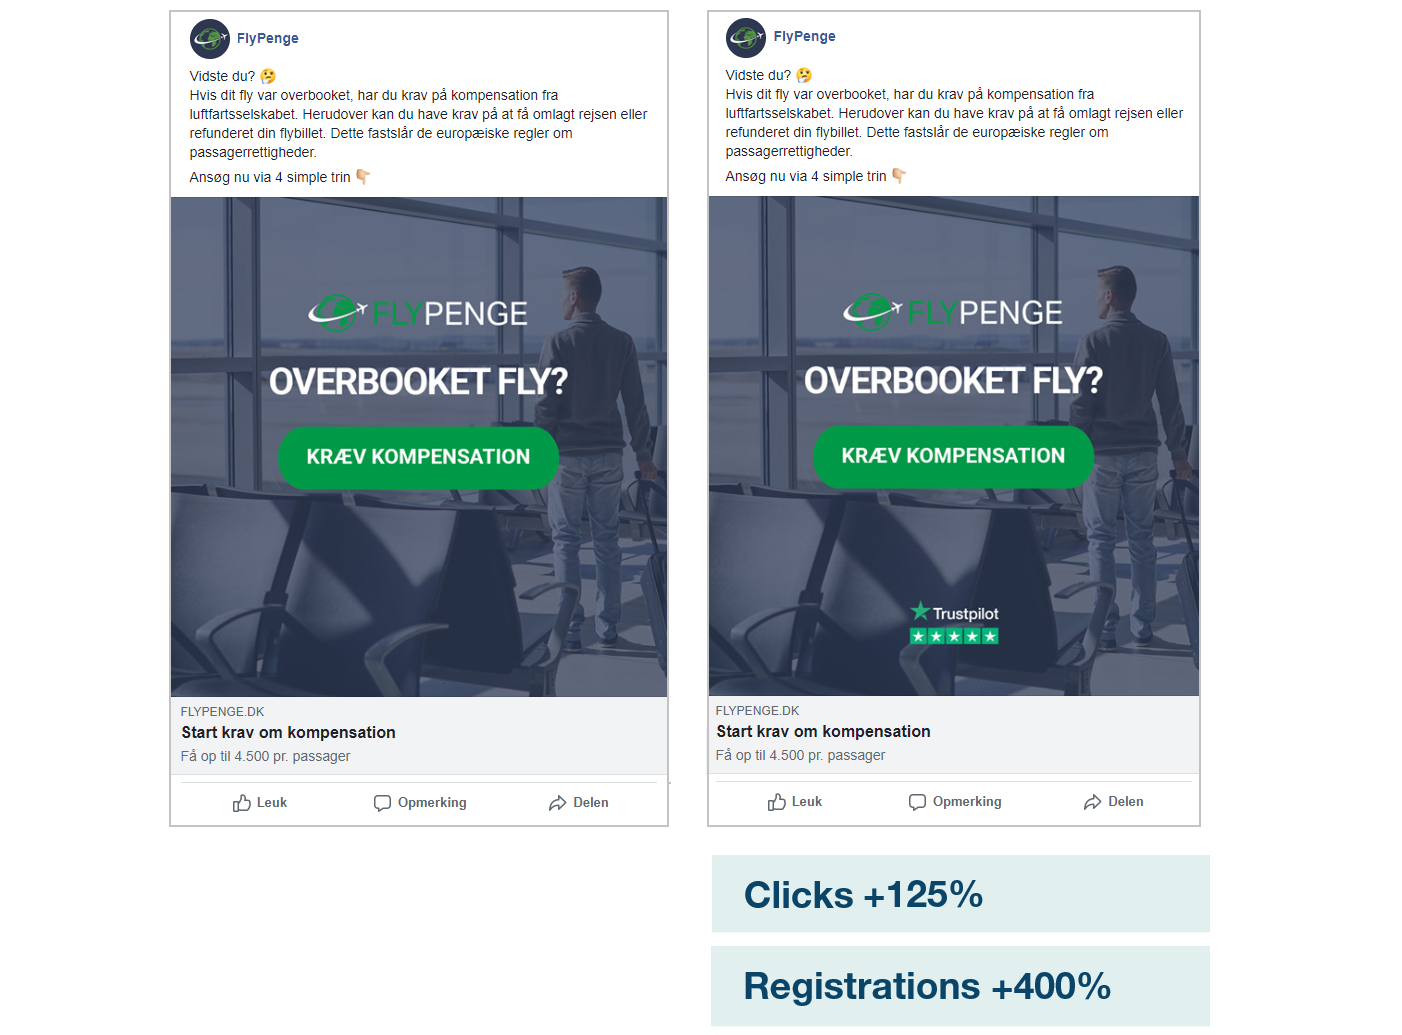 Flypenge.dk uses social proof to boost ads performance